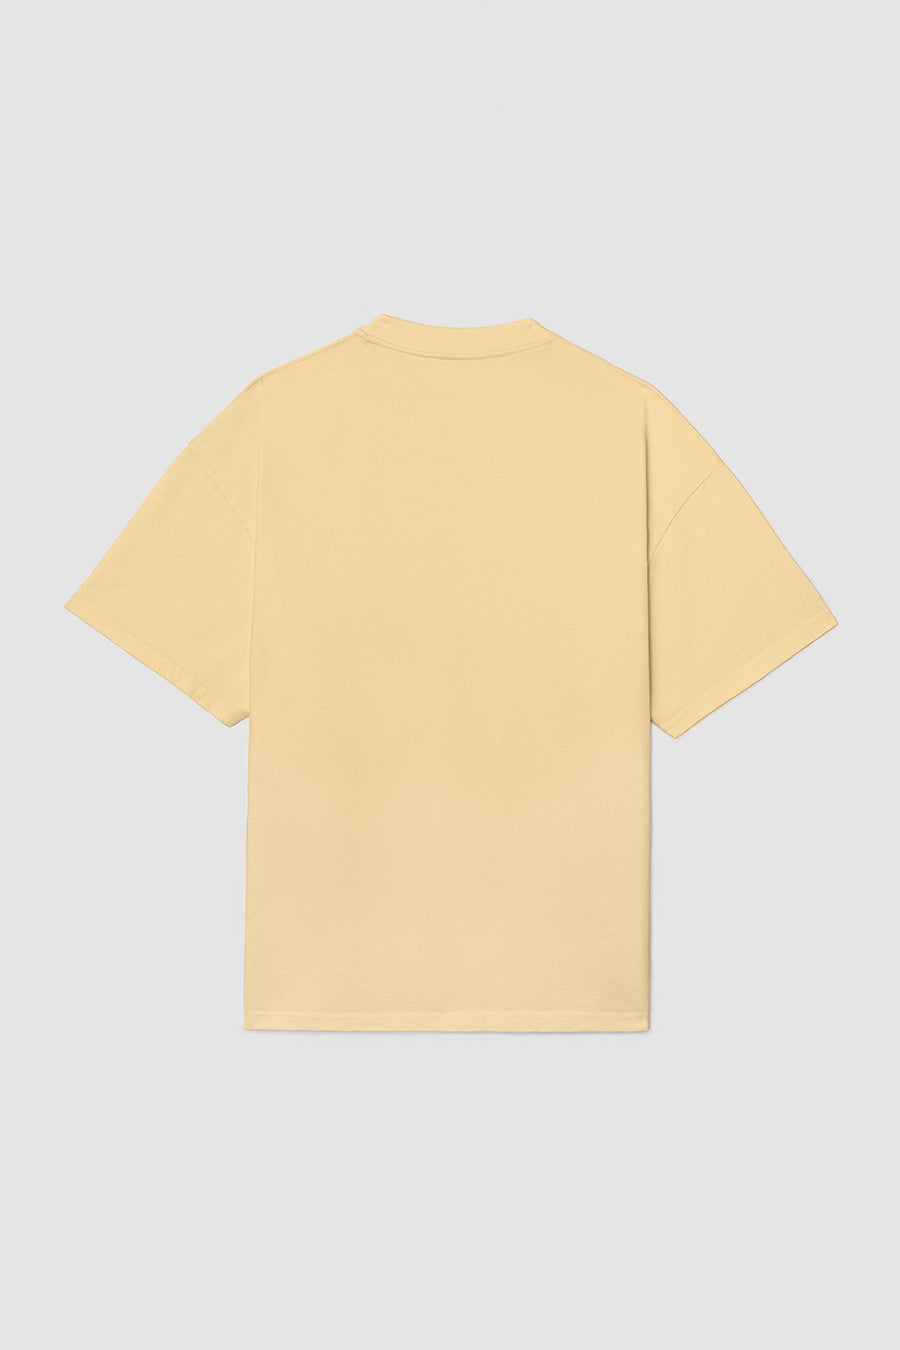 Apricot T-Shirt - only available in wholesale